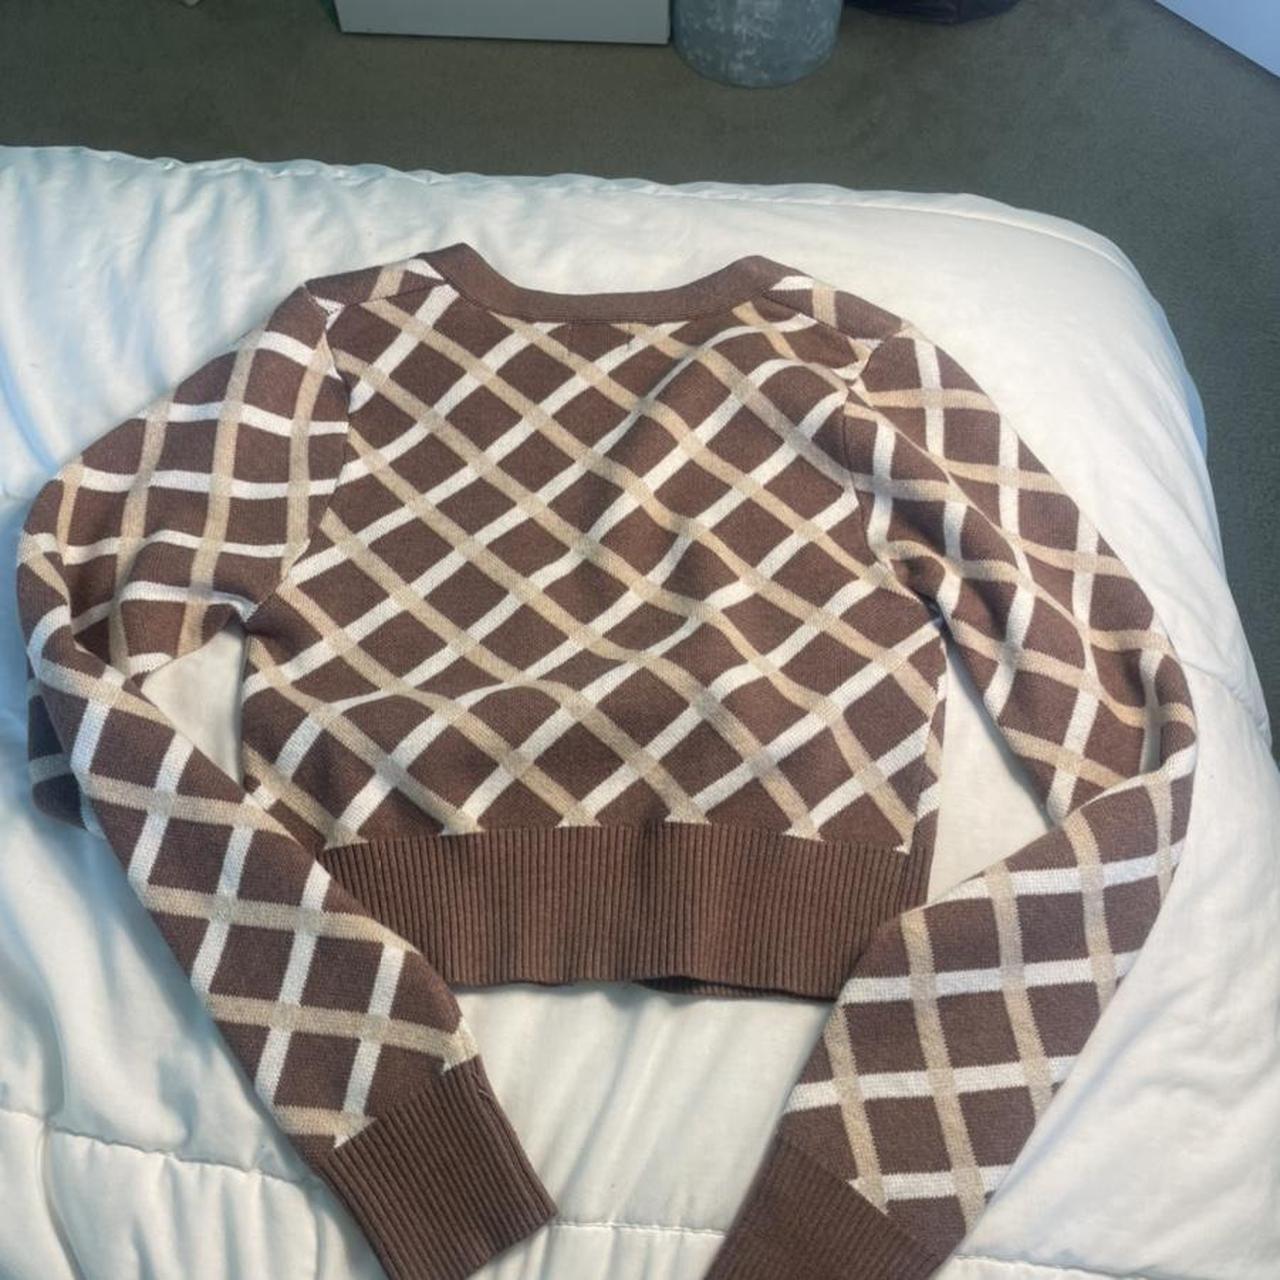 Product Image 4 - Super cute cardigan!
Brown with the